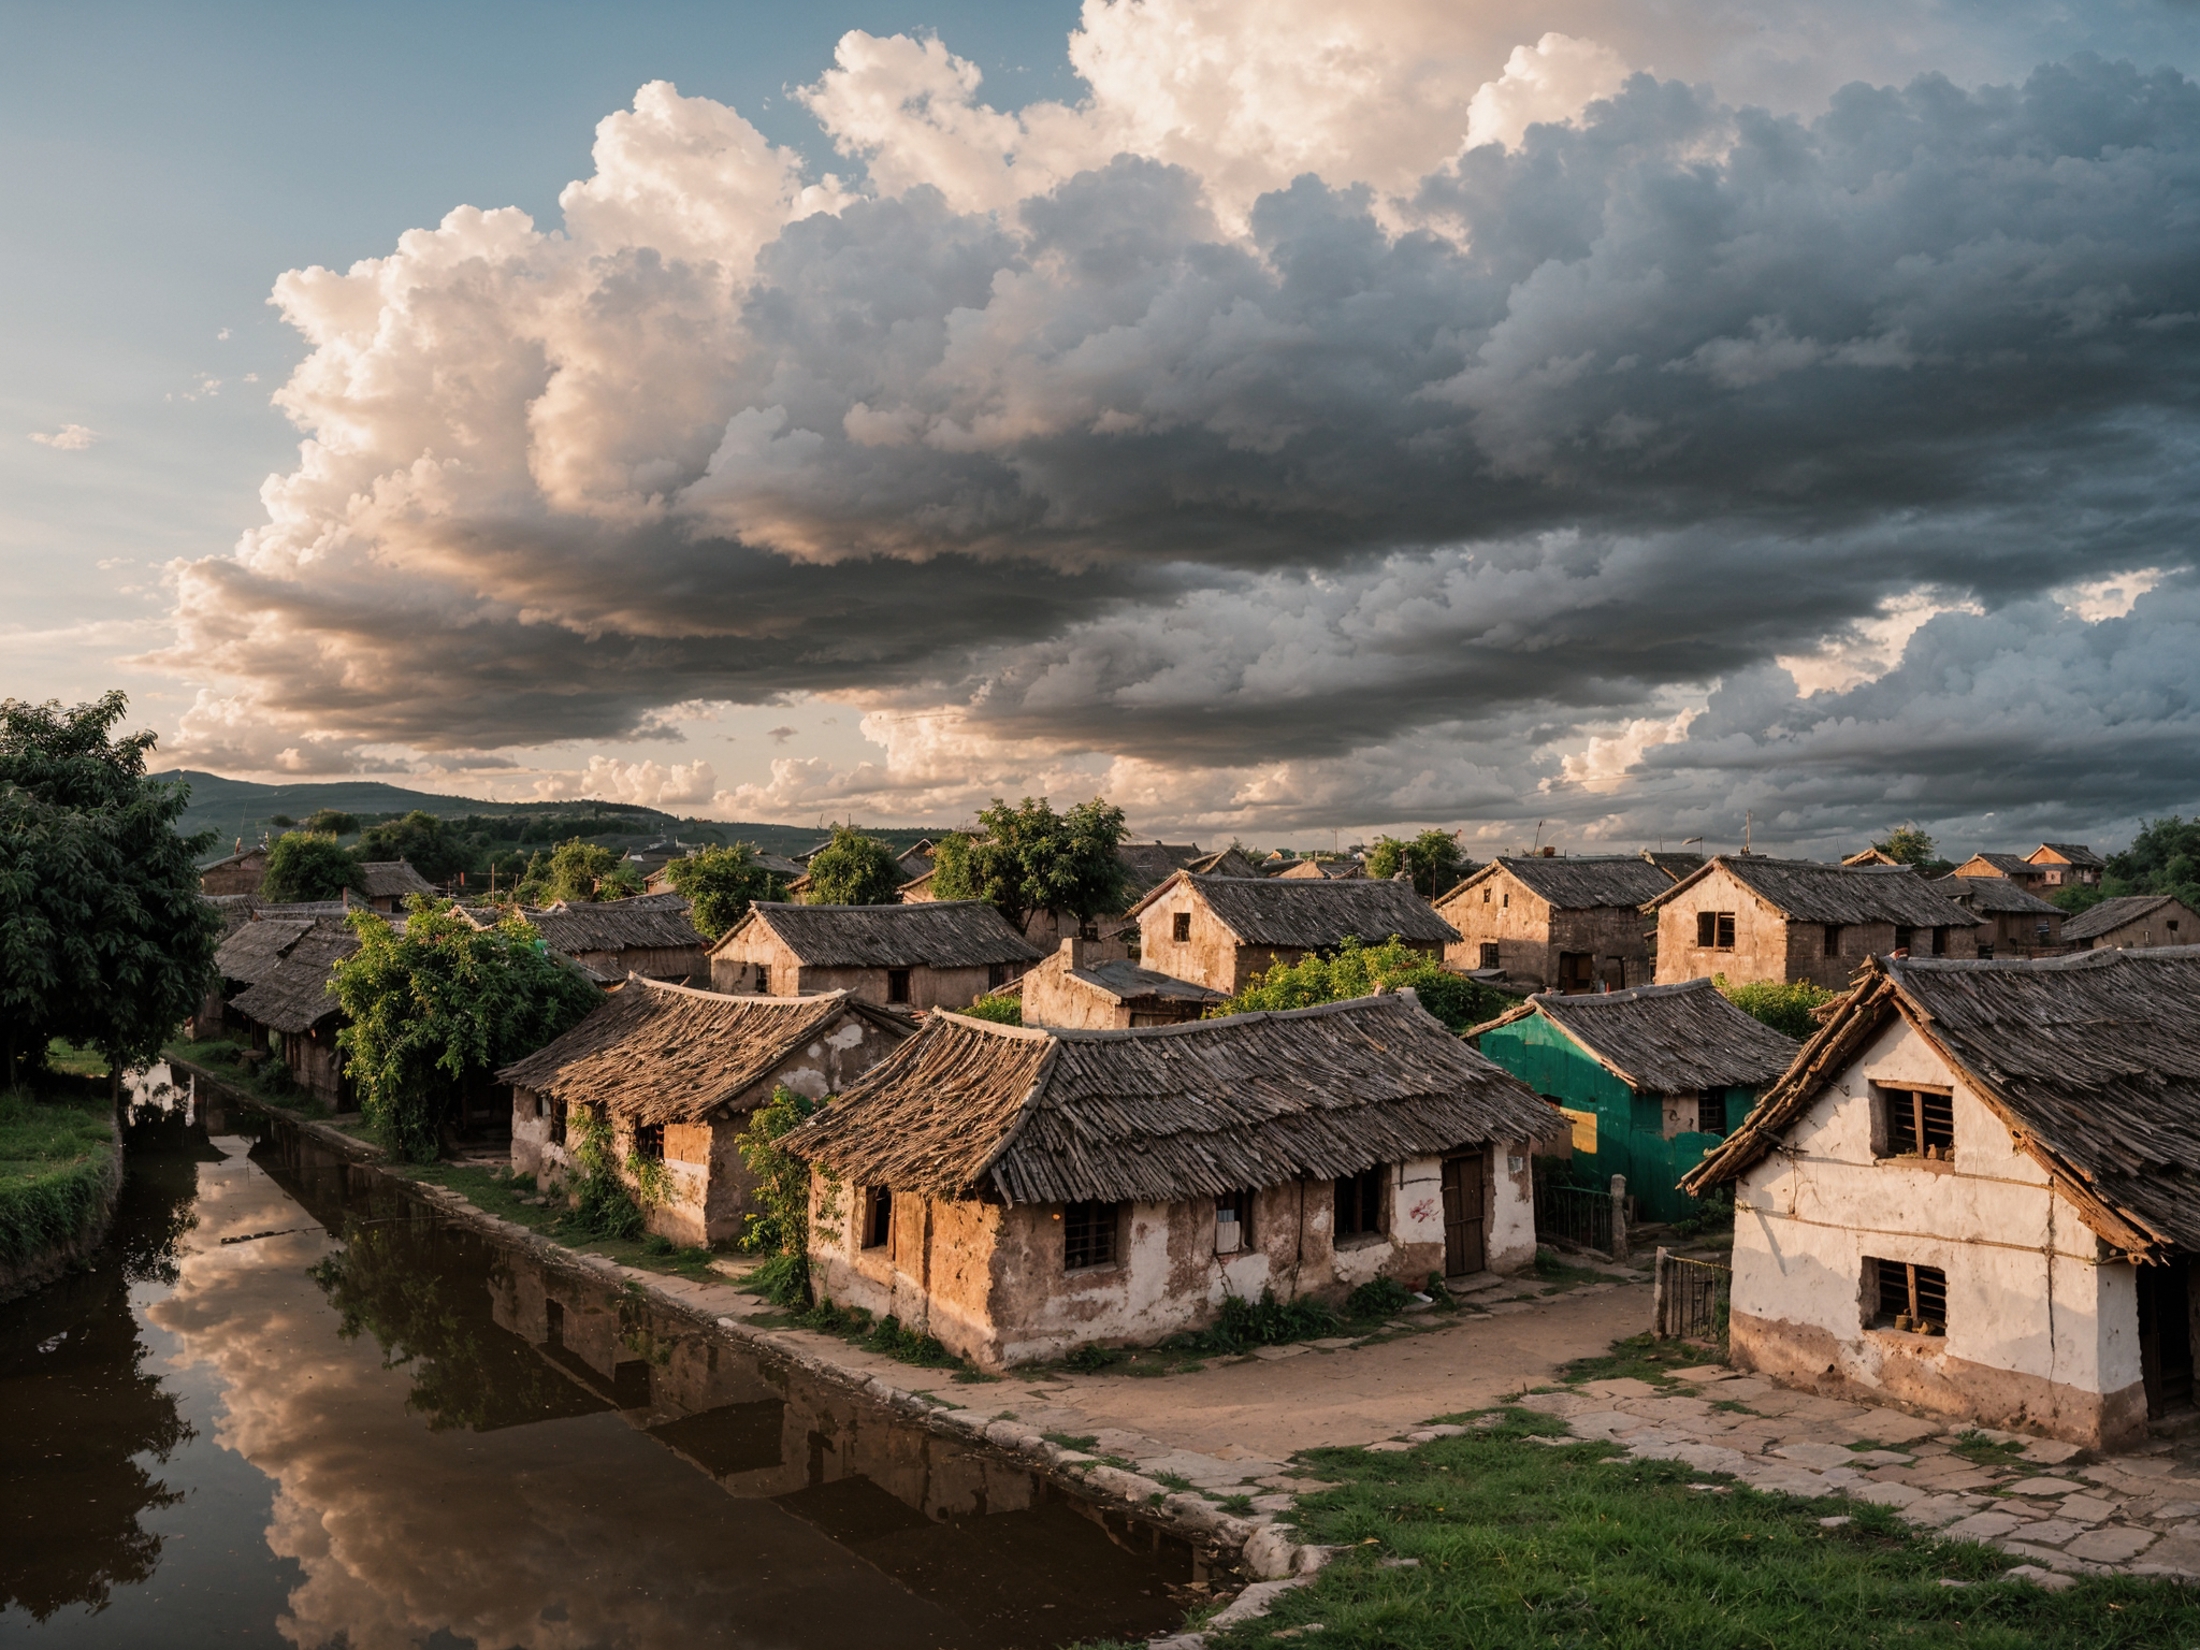 A village with houses and a river, under a cloudy sky.